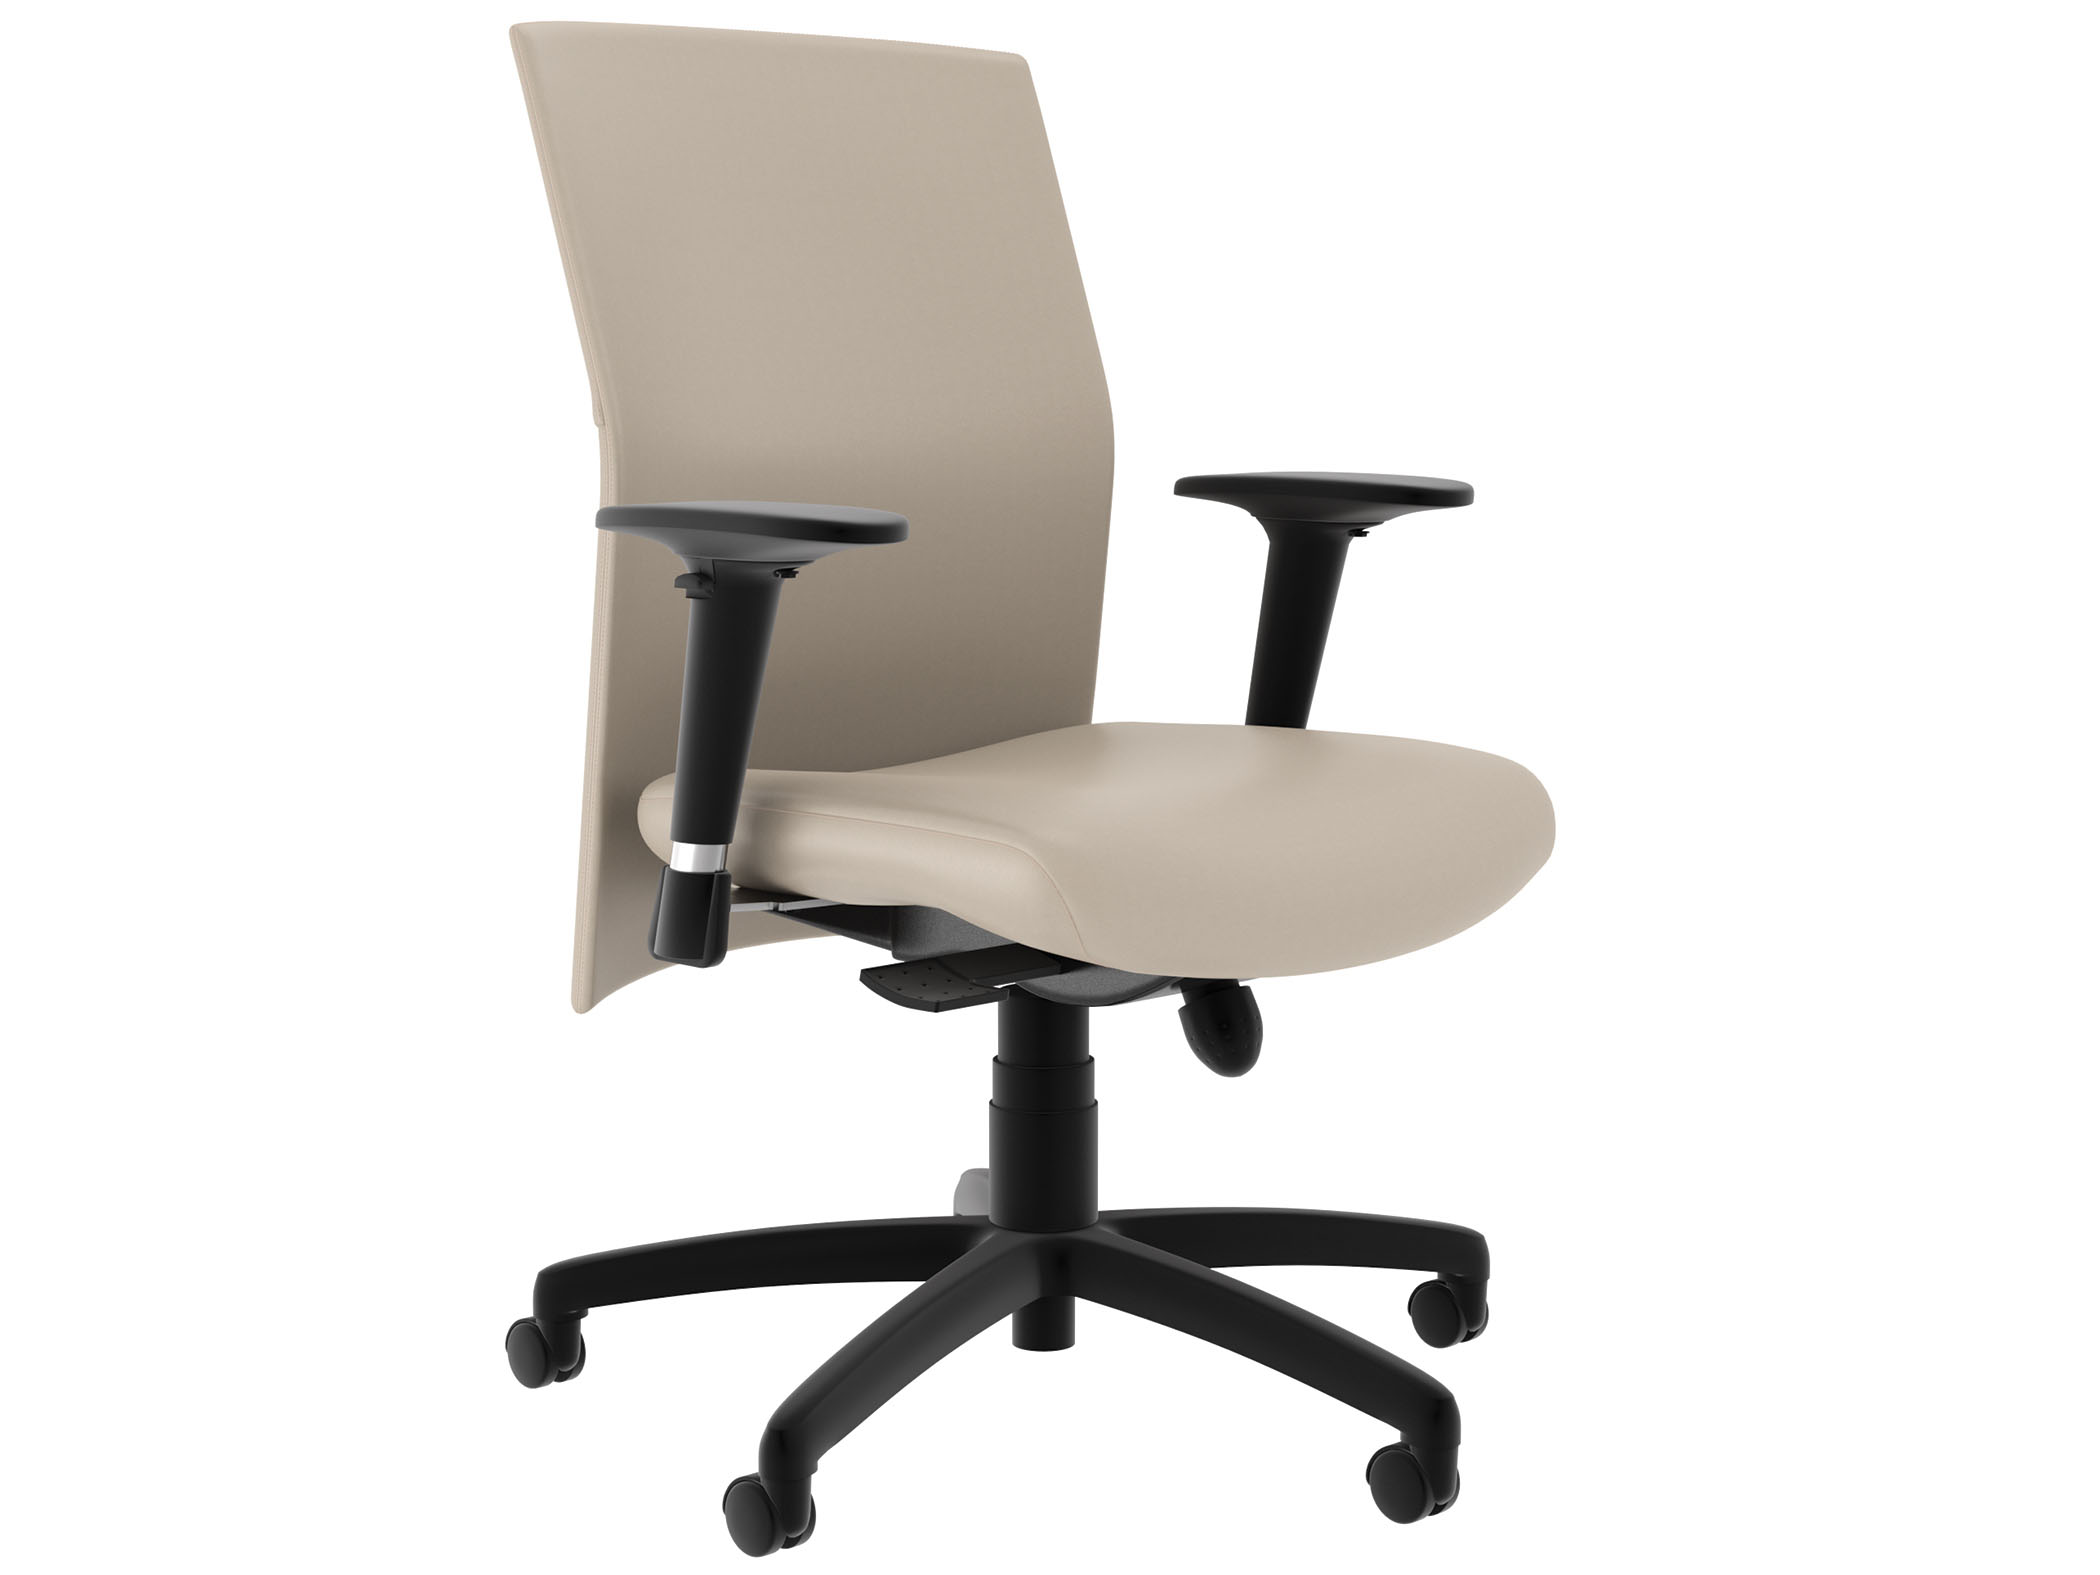 Executive Furniture from Compel - Pinnacle task chair